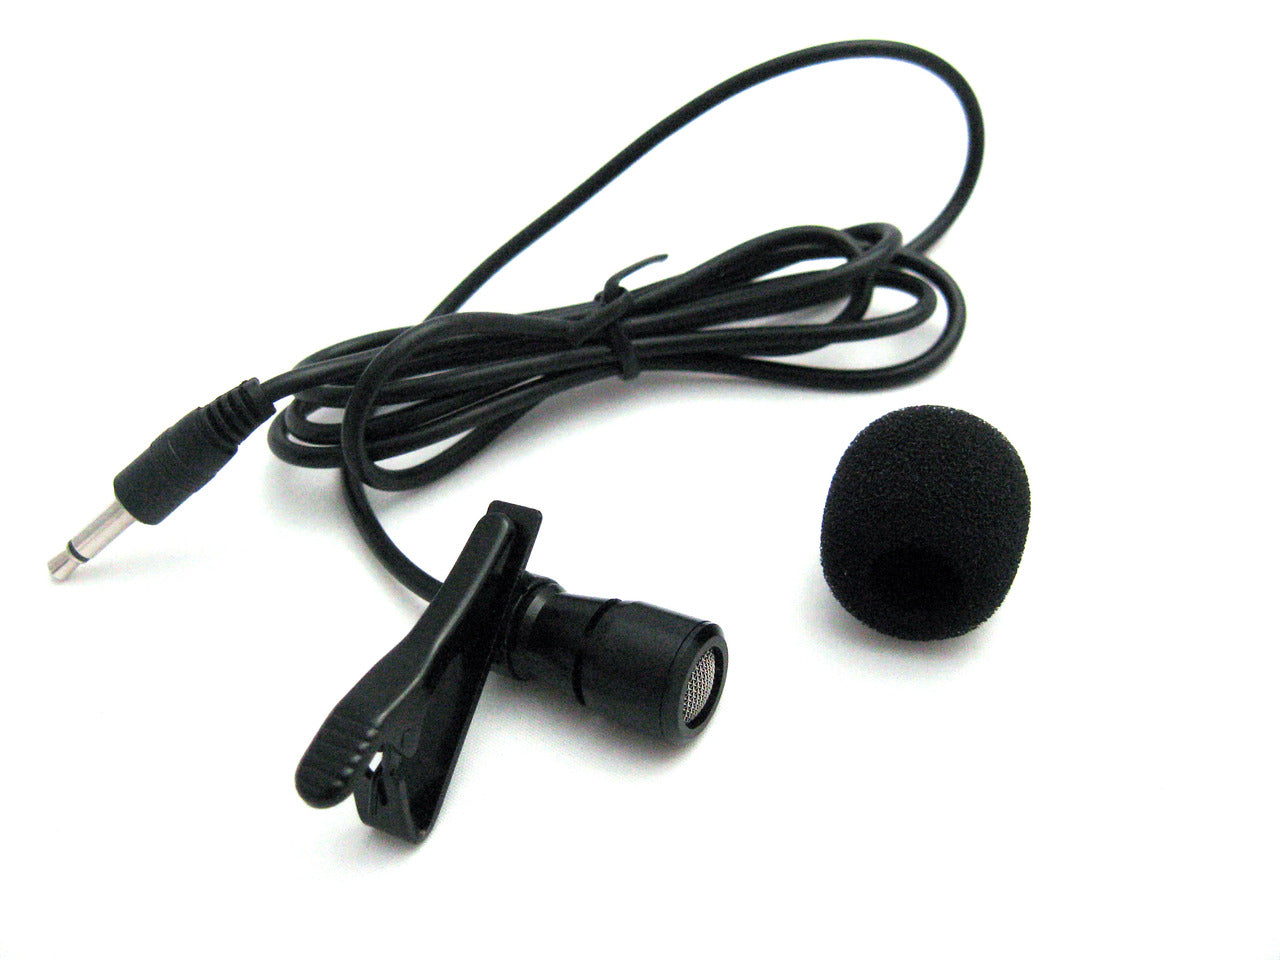 Enersound LAV-100 Lavalier Microphone with 3.5mm plug